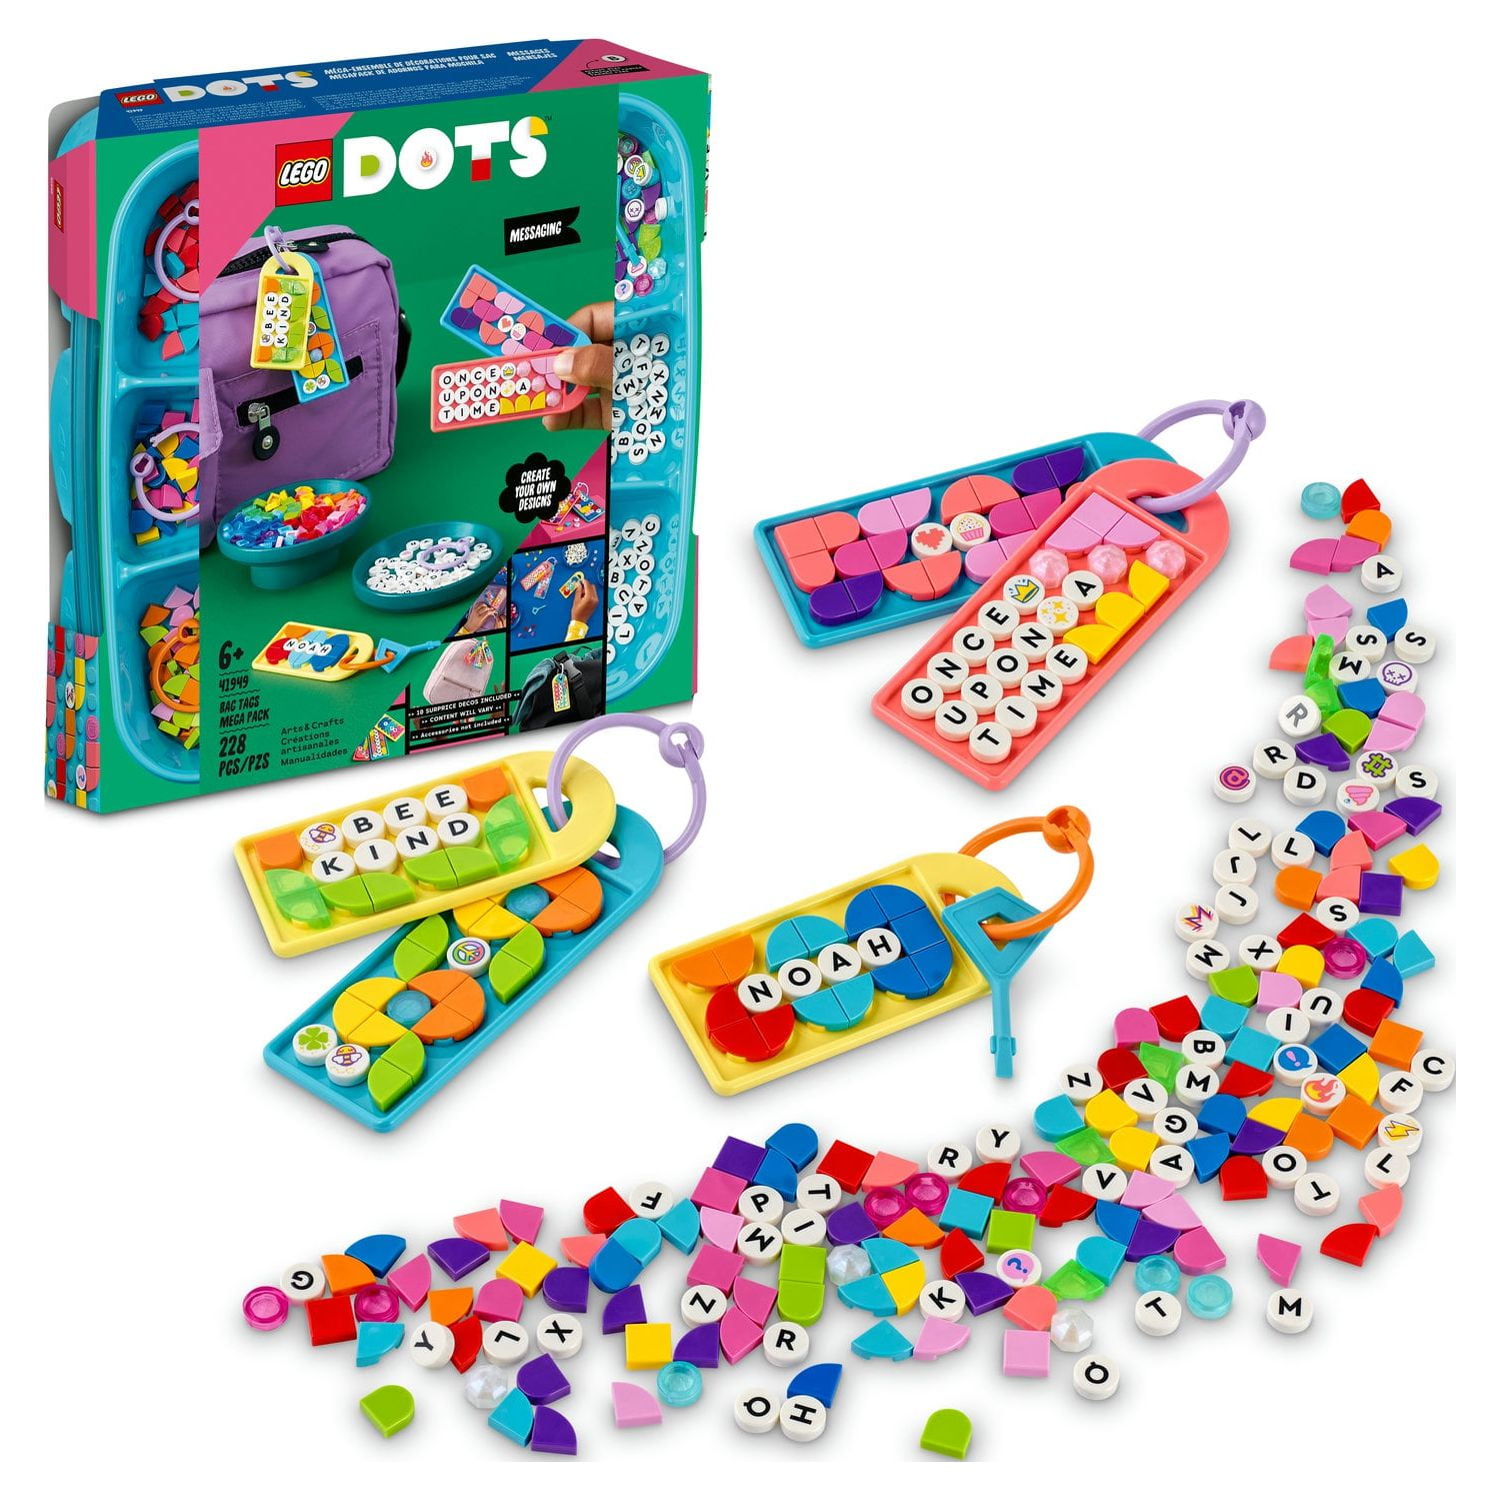 Lego dots tags